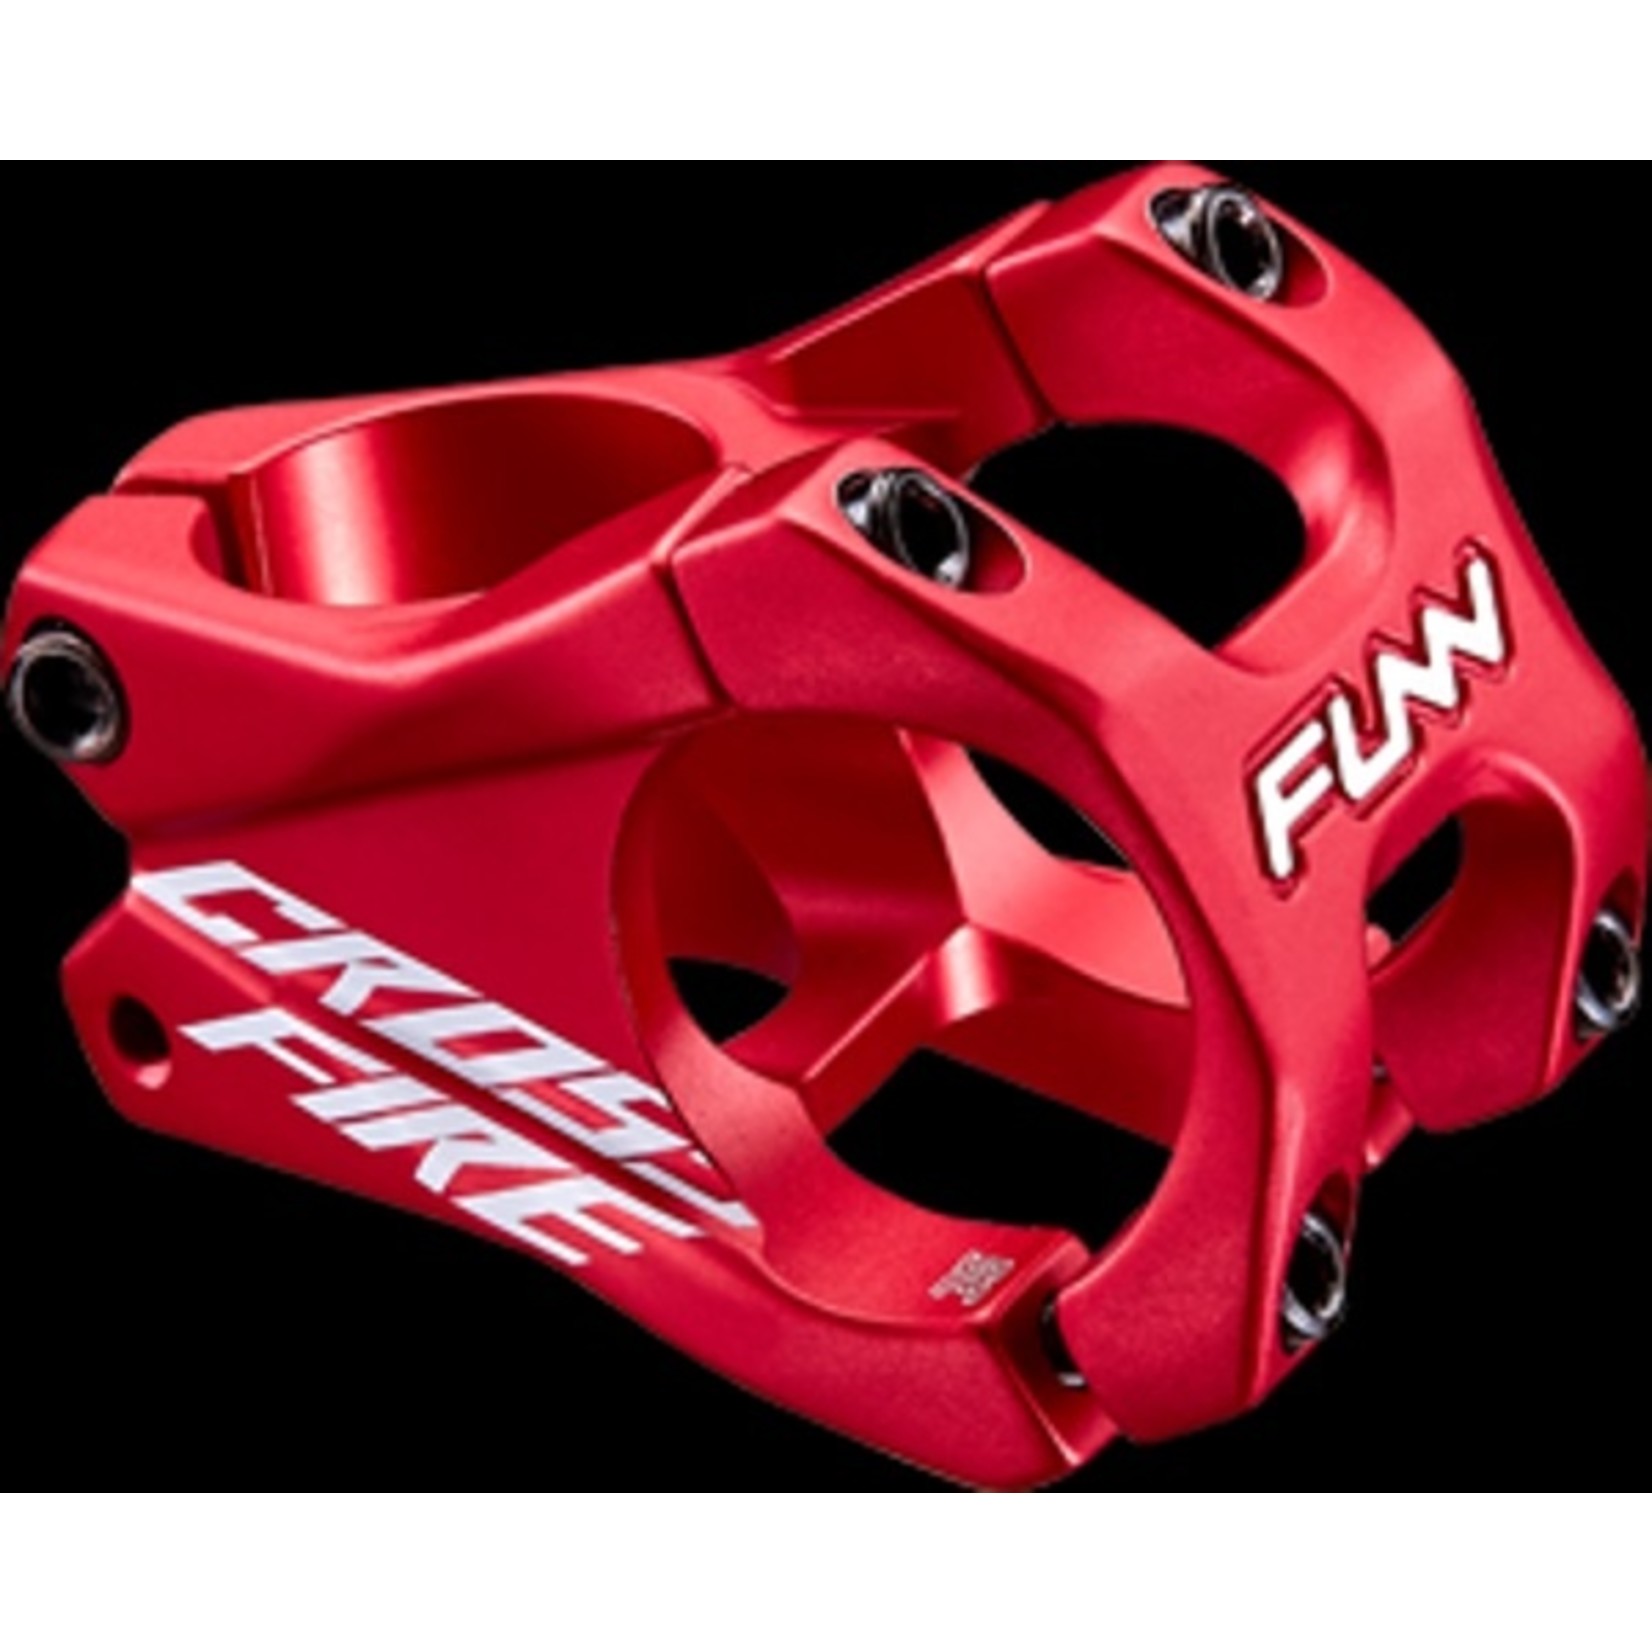 FUNN Funn Bicycle Stem - Crossfire - 35mm - 35mm - 0° Rise - Steer 1-1/8 Inch - Red